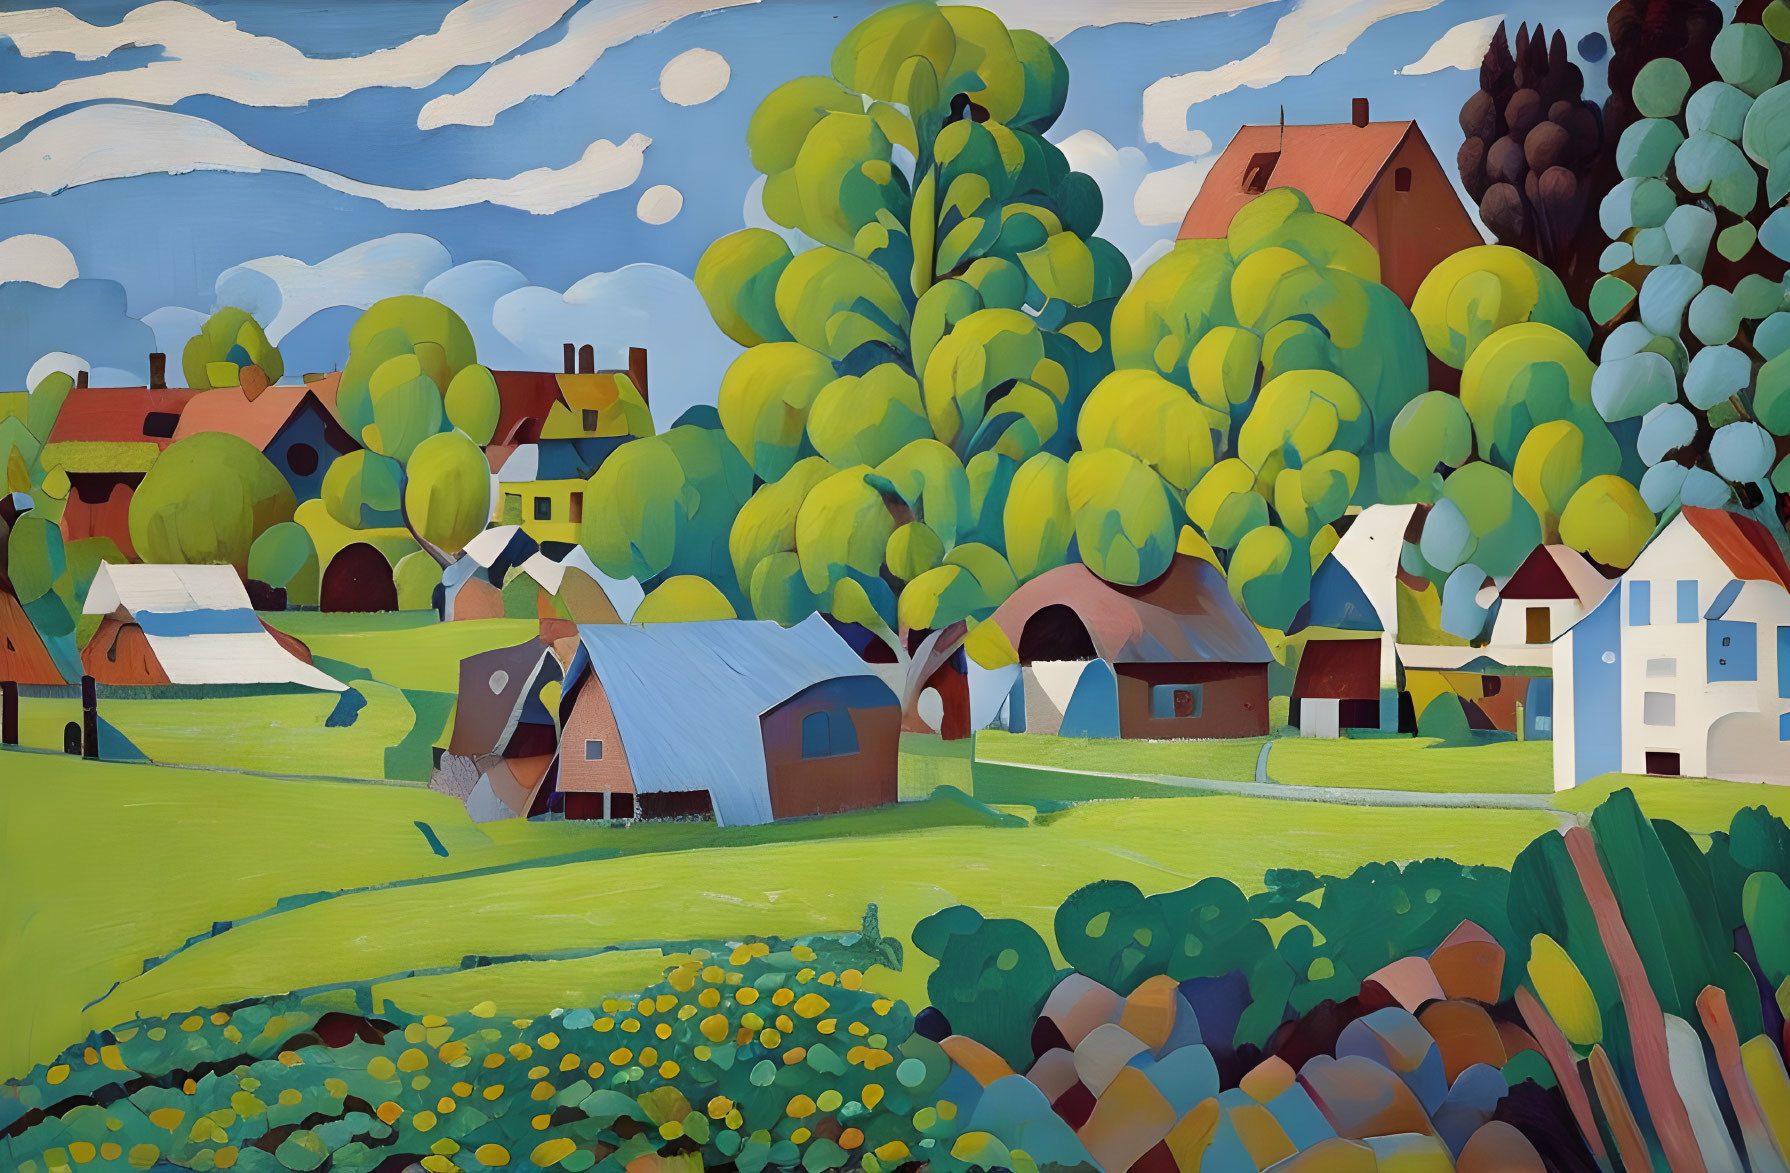 Colorful Stylized Painting of Rural Landscape with Rounded Trees and Patterned Fields